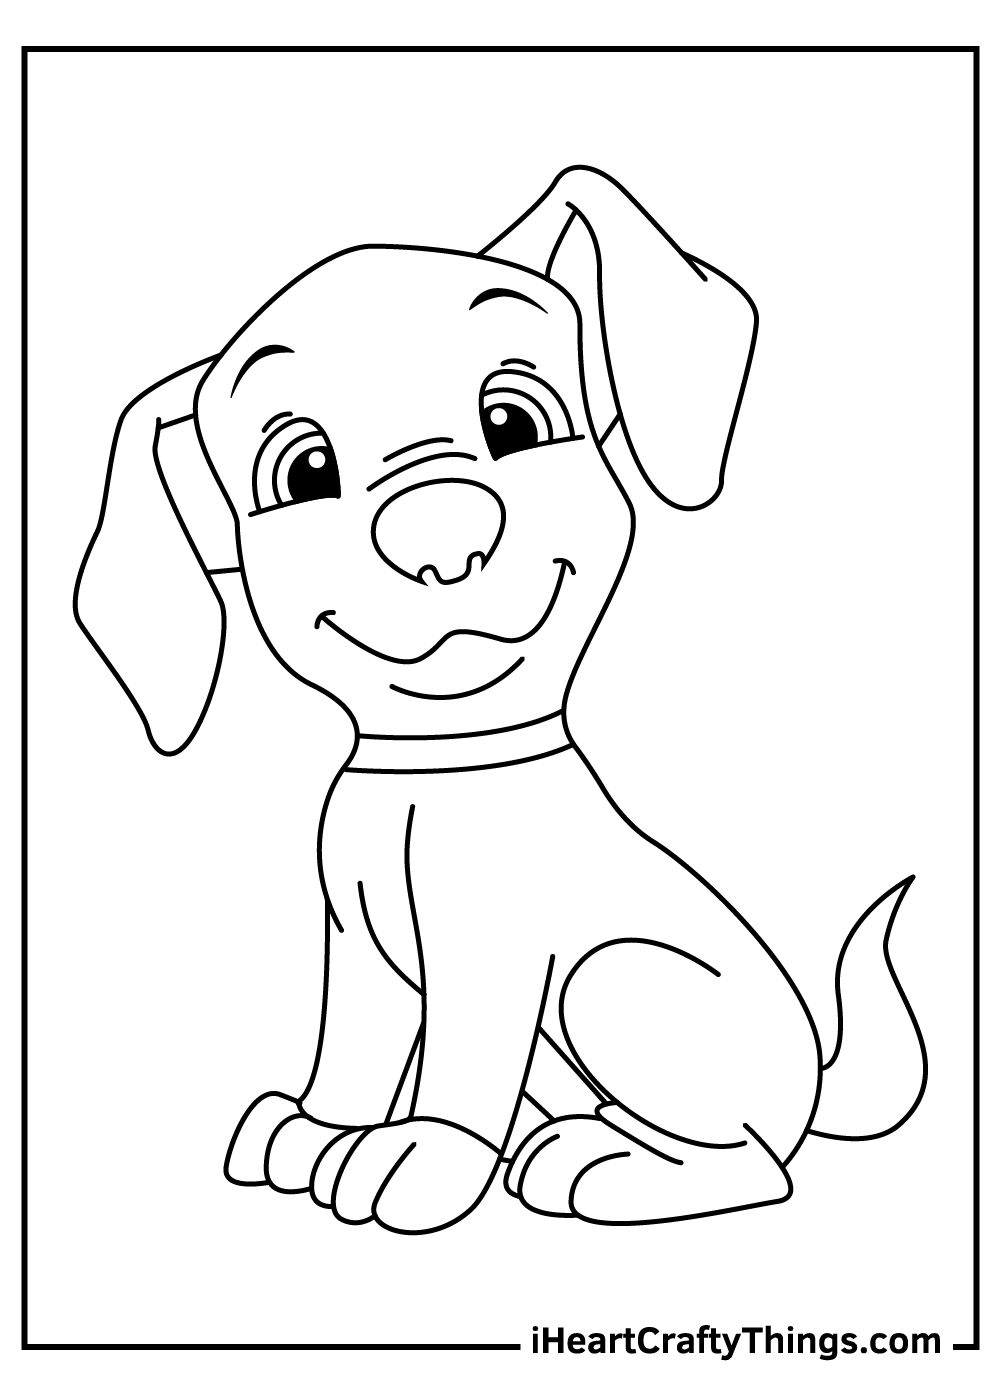 animal easy coloring pages